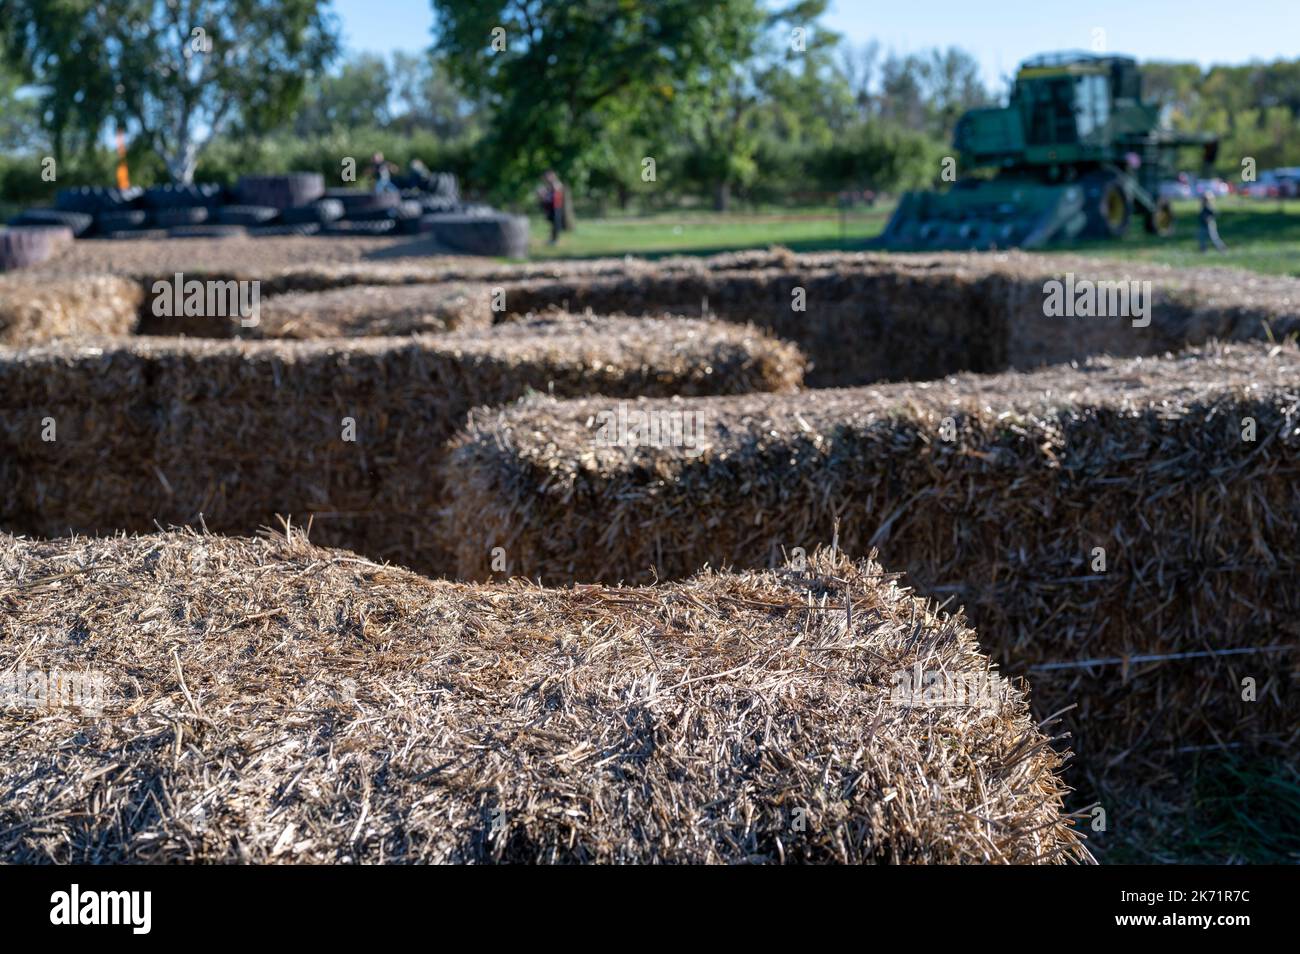 Straw bale maze with child going along a path towards the center.  Stock Photo